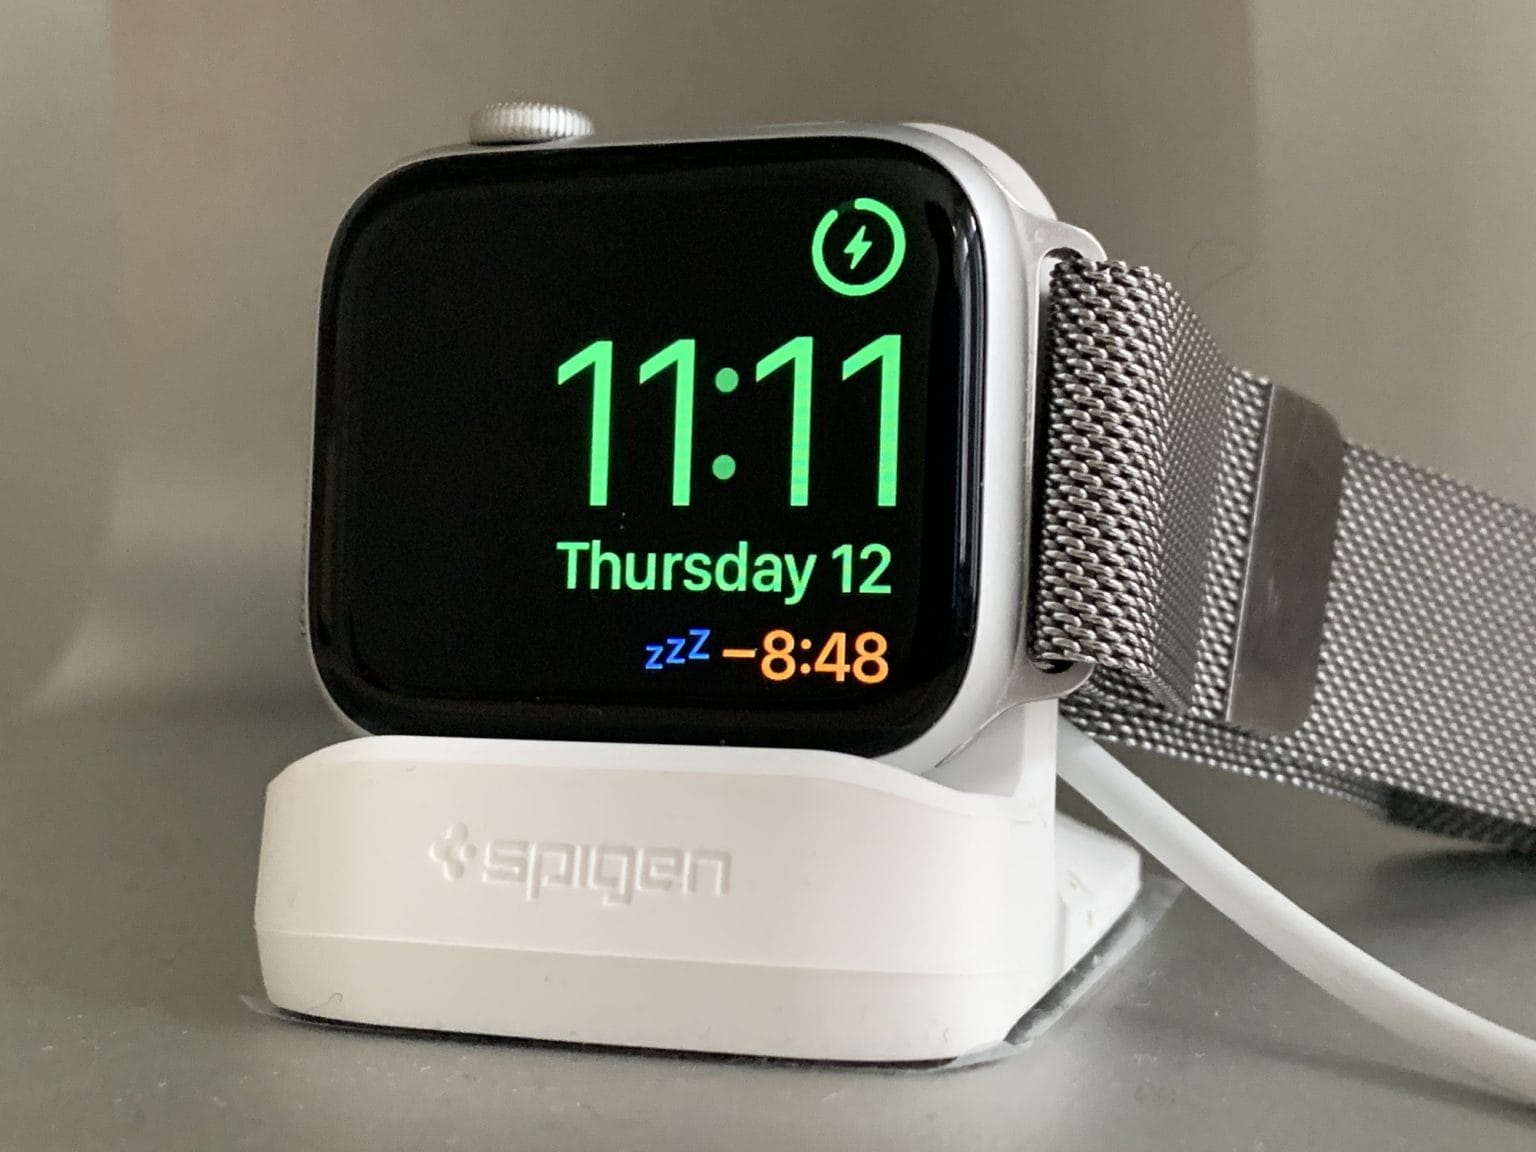 Zzzzzz. The Apple Watch's nightstand mode even has snooze.